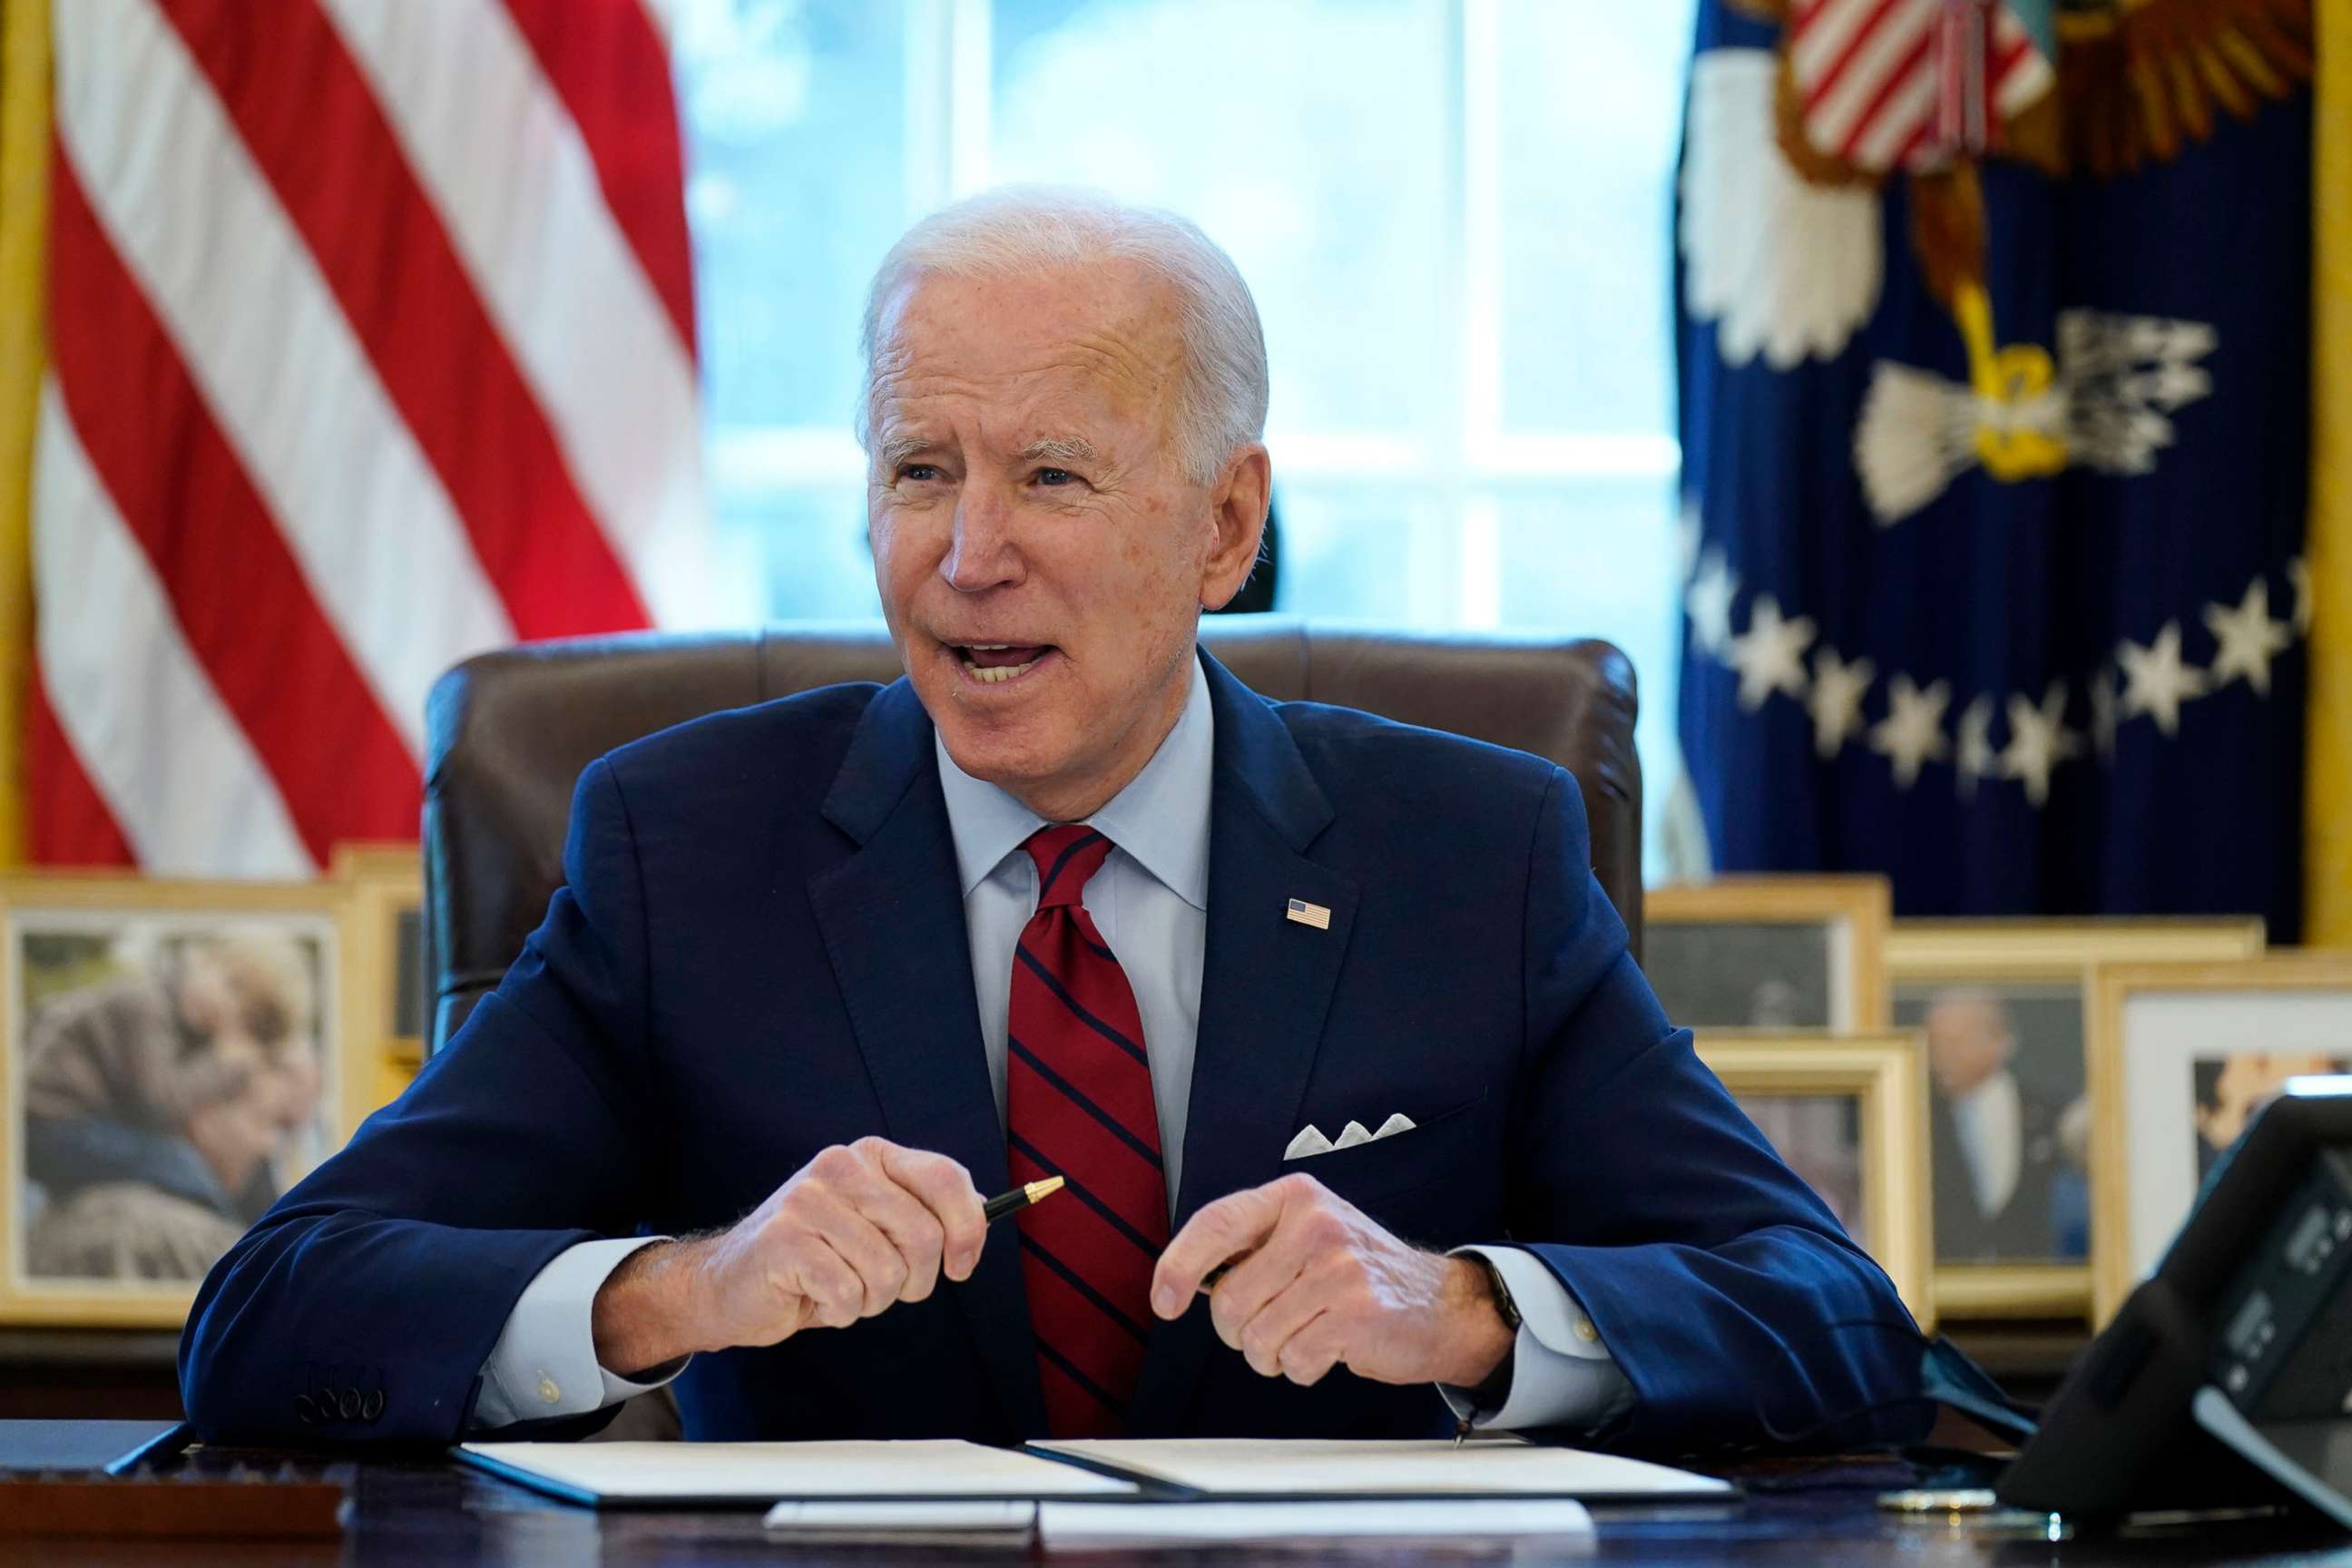 PHOTO: President Joe Biden signs a series of executive orders on health care, in the Oval Office of the White House, Thursday, Jan. 28, 2021, in Washington. (AP Photo/Evan Vucci)